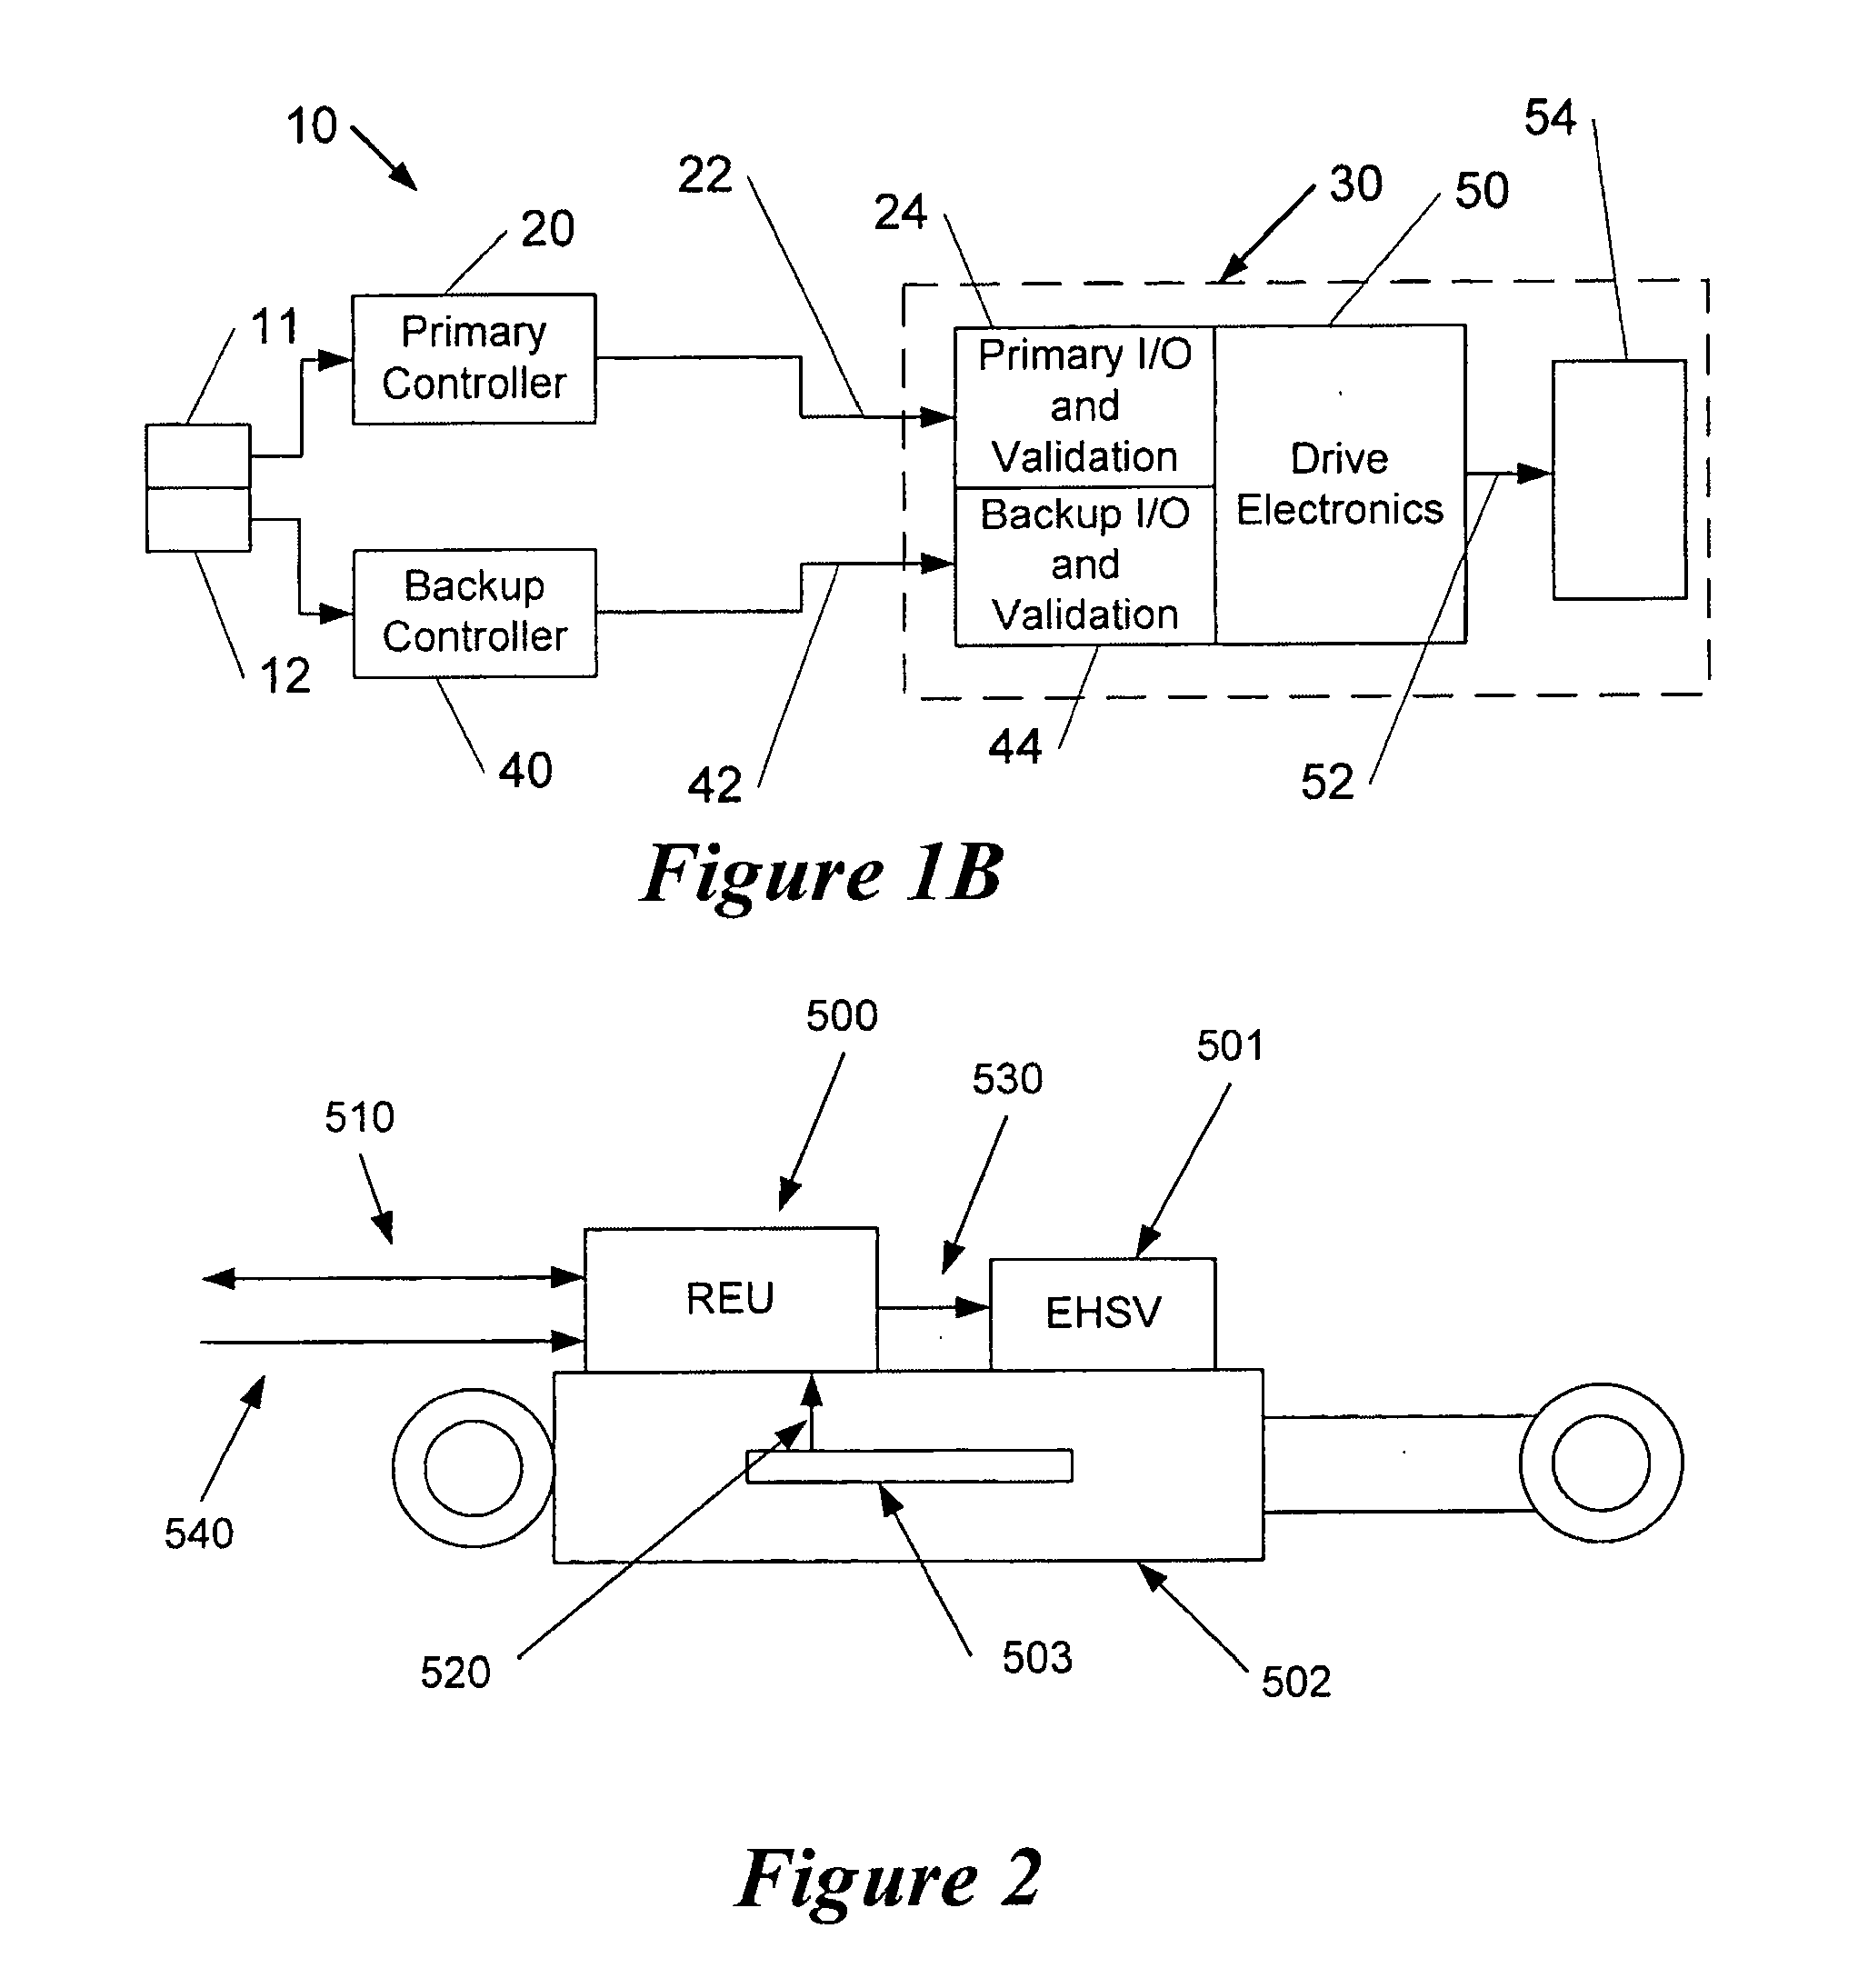 Apparatus and Method for Backup Control in a Distributed Flight Control System